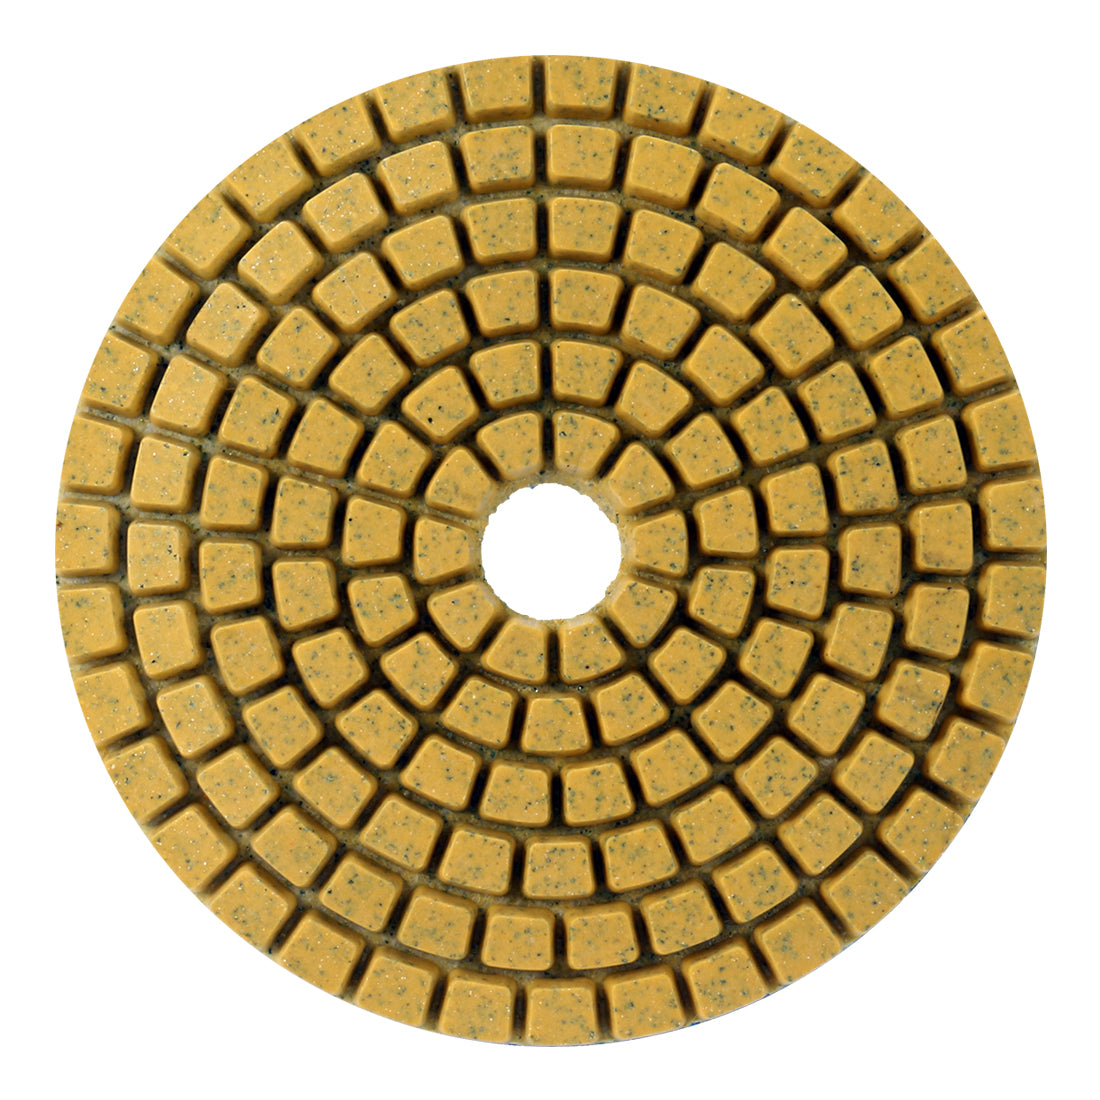 uxcell Uxcell 3-inch Diamond Wet Polishing Pad Disc Grit 50 10pcs for Granite Concrete Marble